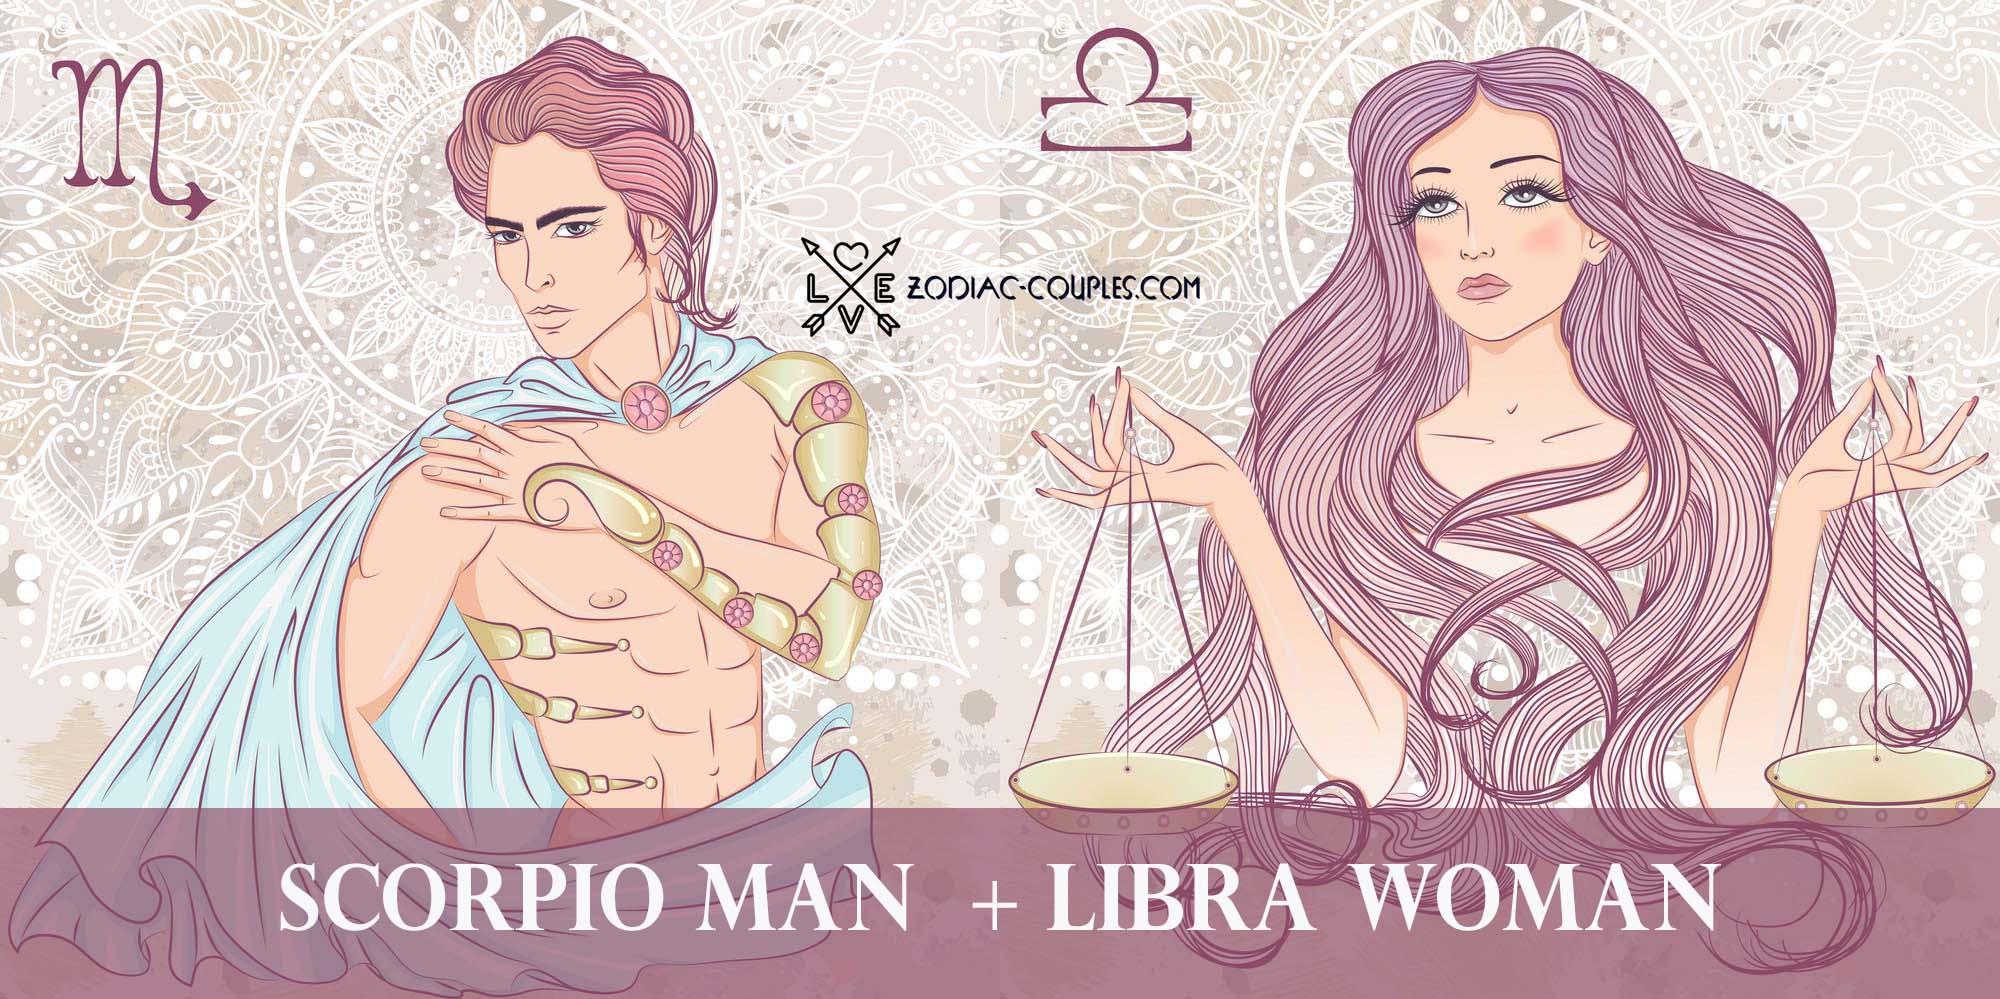 Scorpio man and Libra woman famous couples and compatibility ♏♎